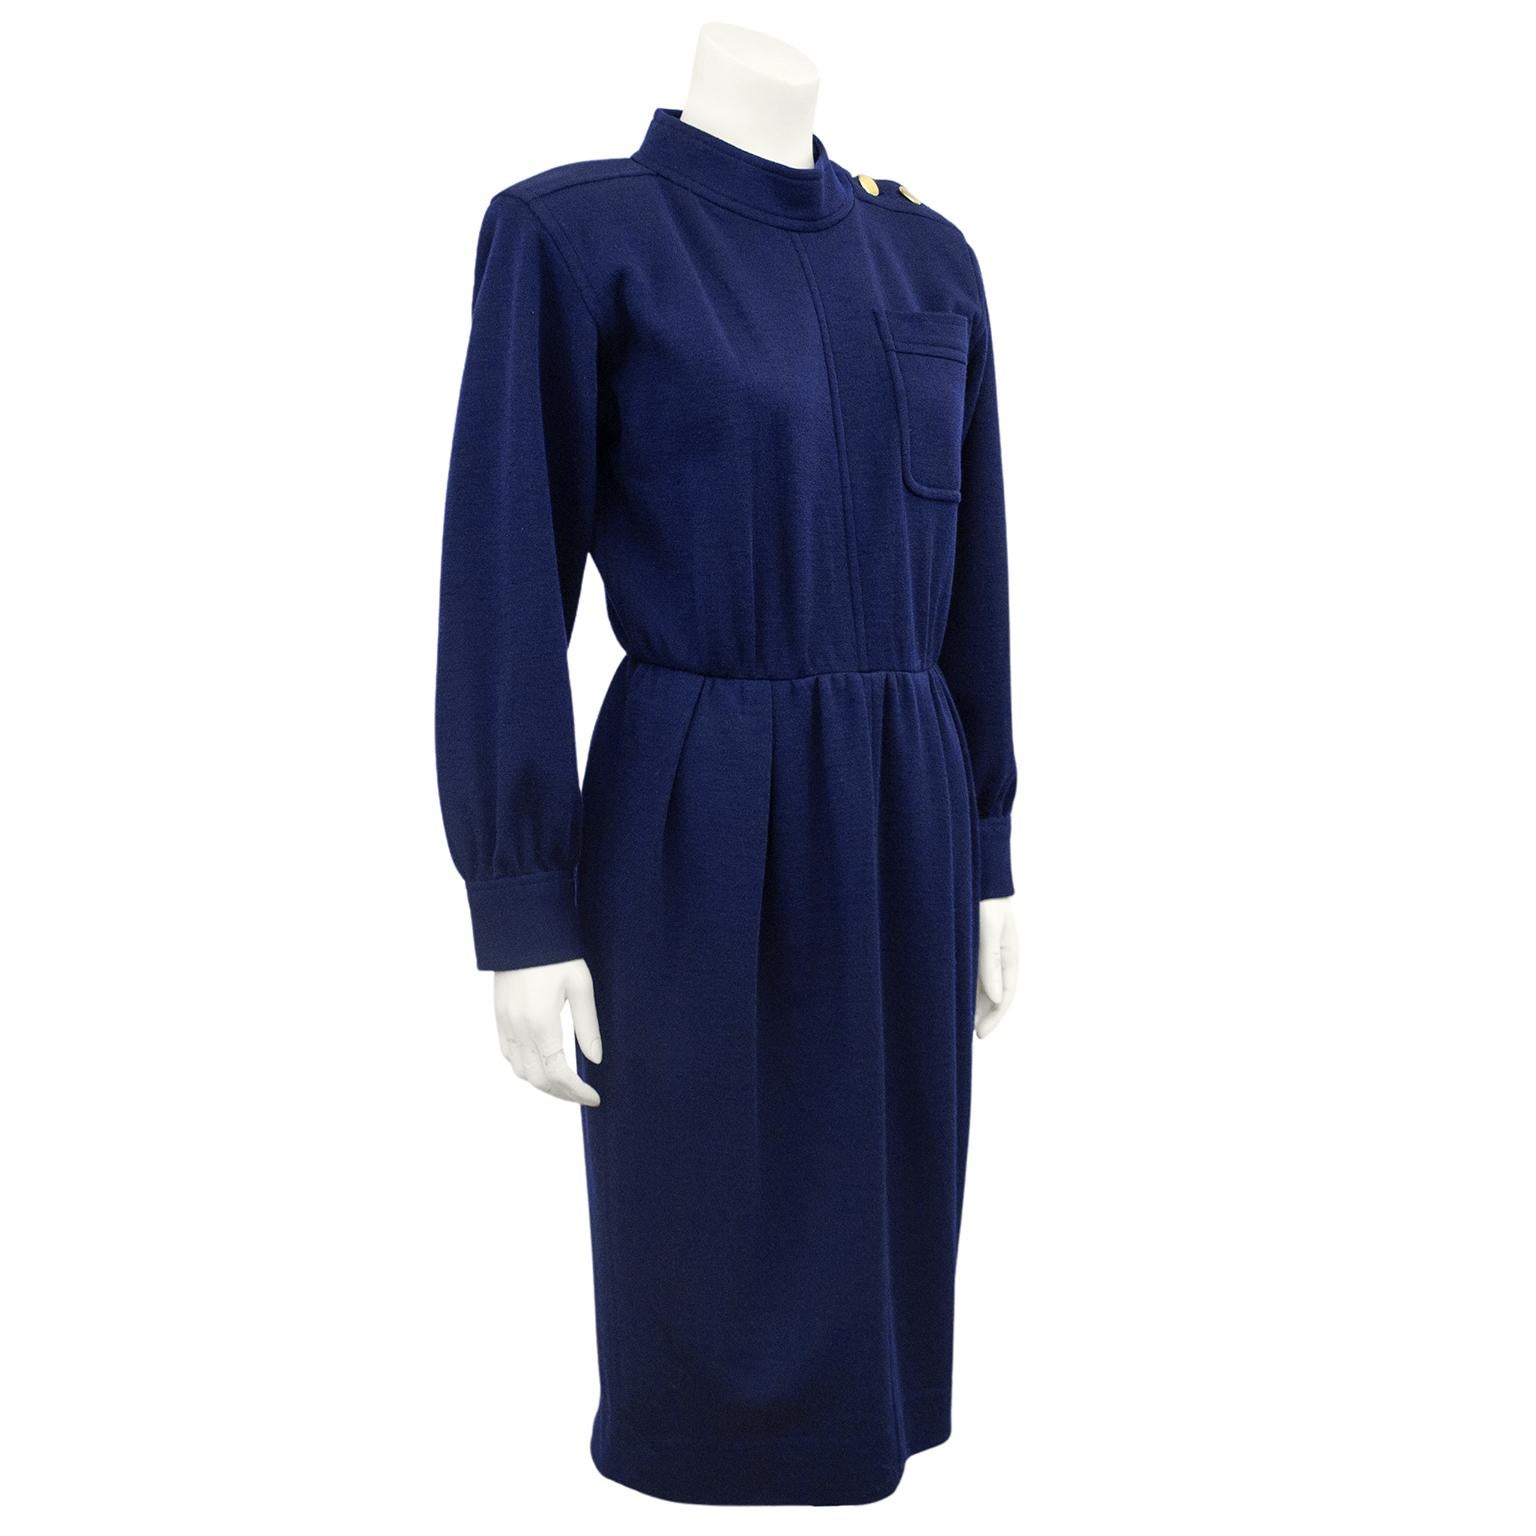 1970s Yves Saint Laurent Rive Gauche navy blue wool day dress. Mock turtleneck collar, long sleeves with small gather at cuff and single patch left breast pocket. Three large gold tone buttons on left shoulder. Fitted at waist and straight skirt